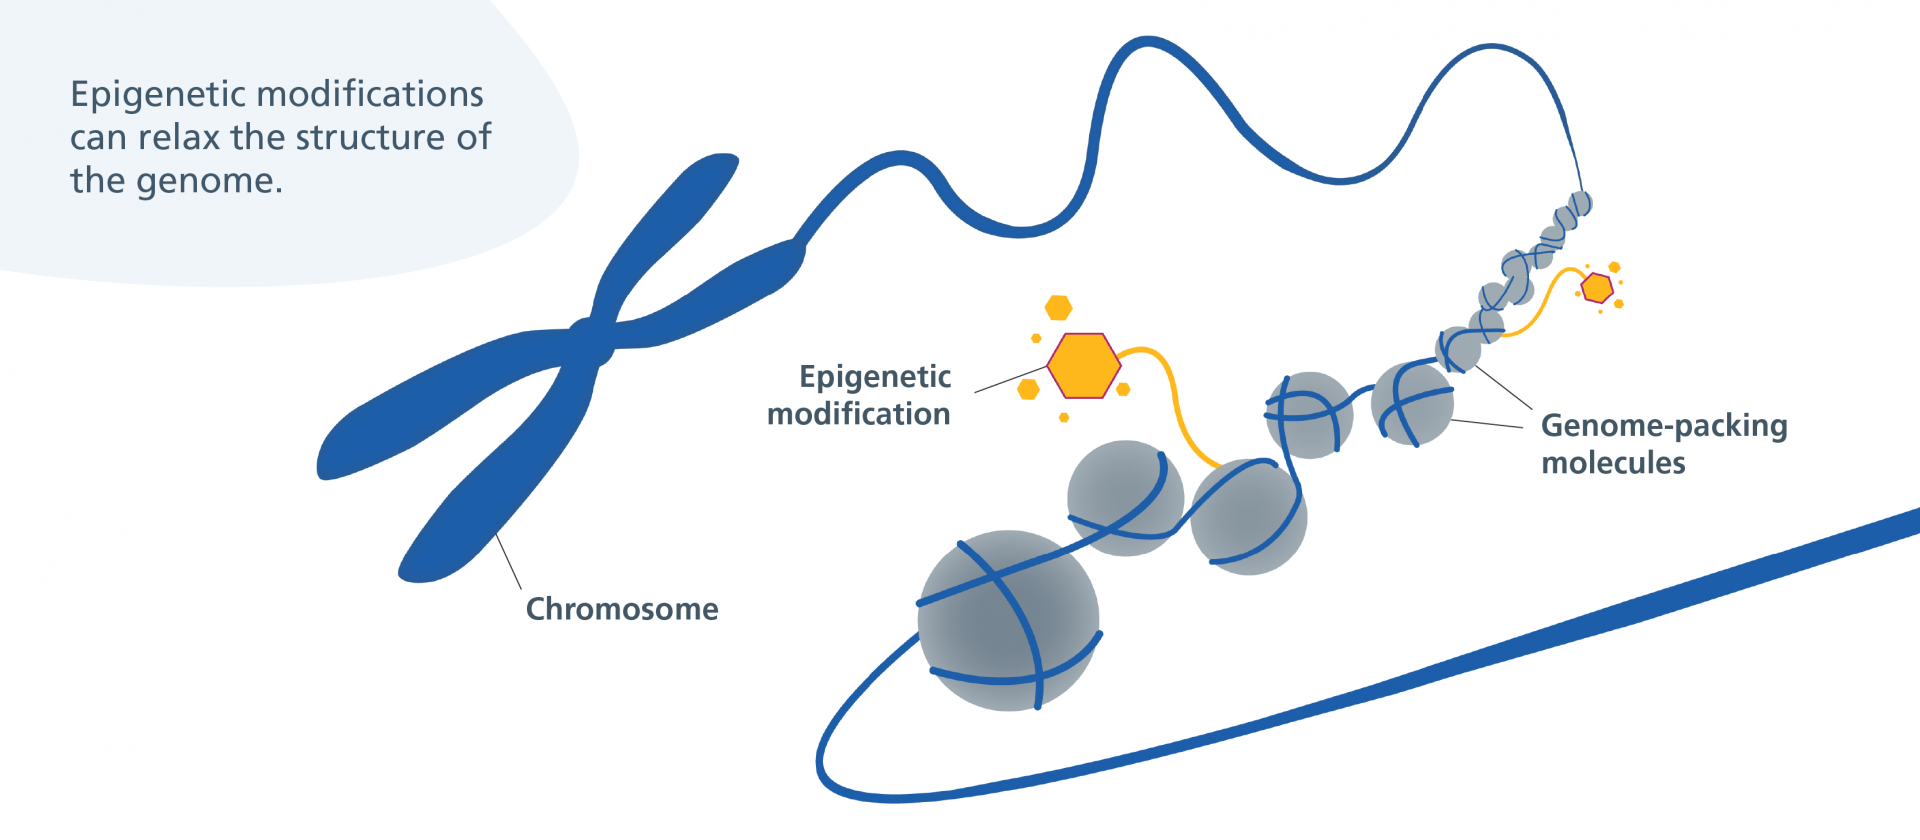 Epigenetic modifications relaxing the structure of the genome by